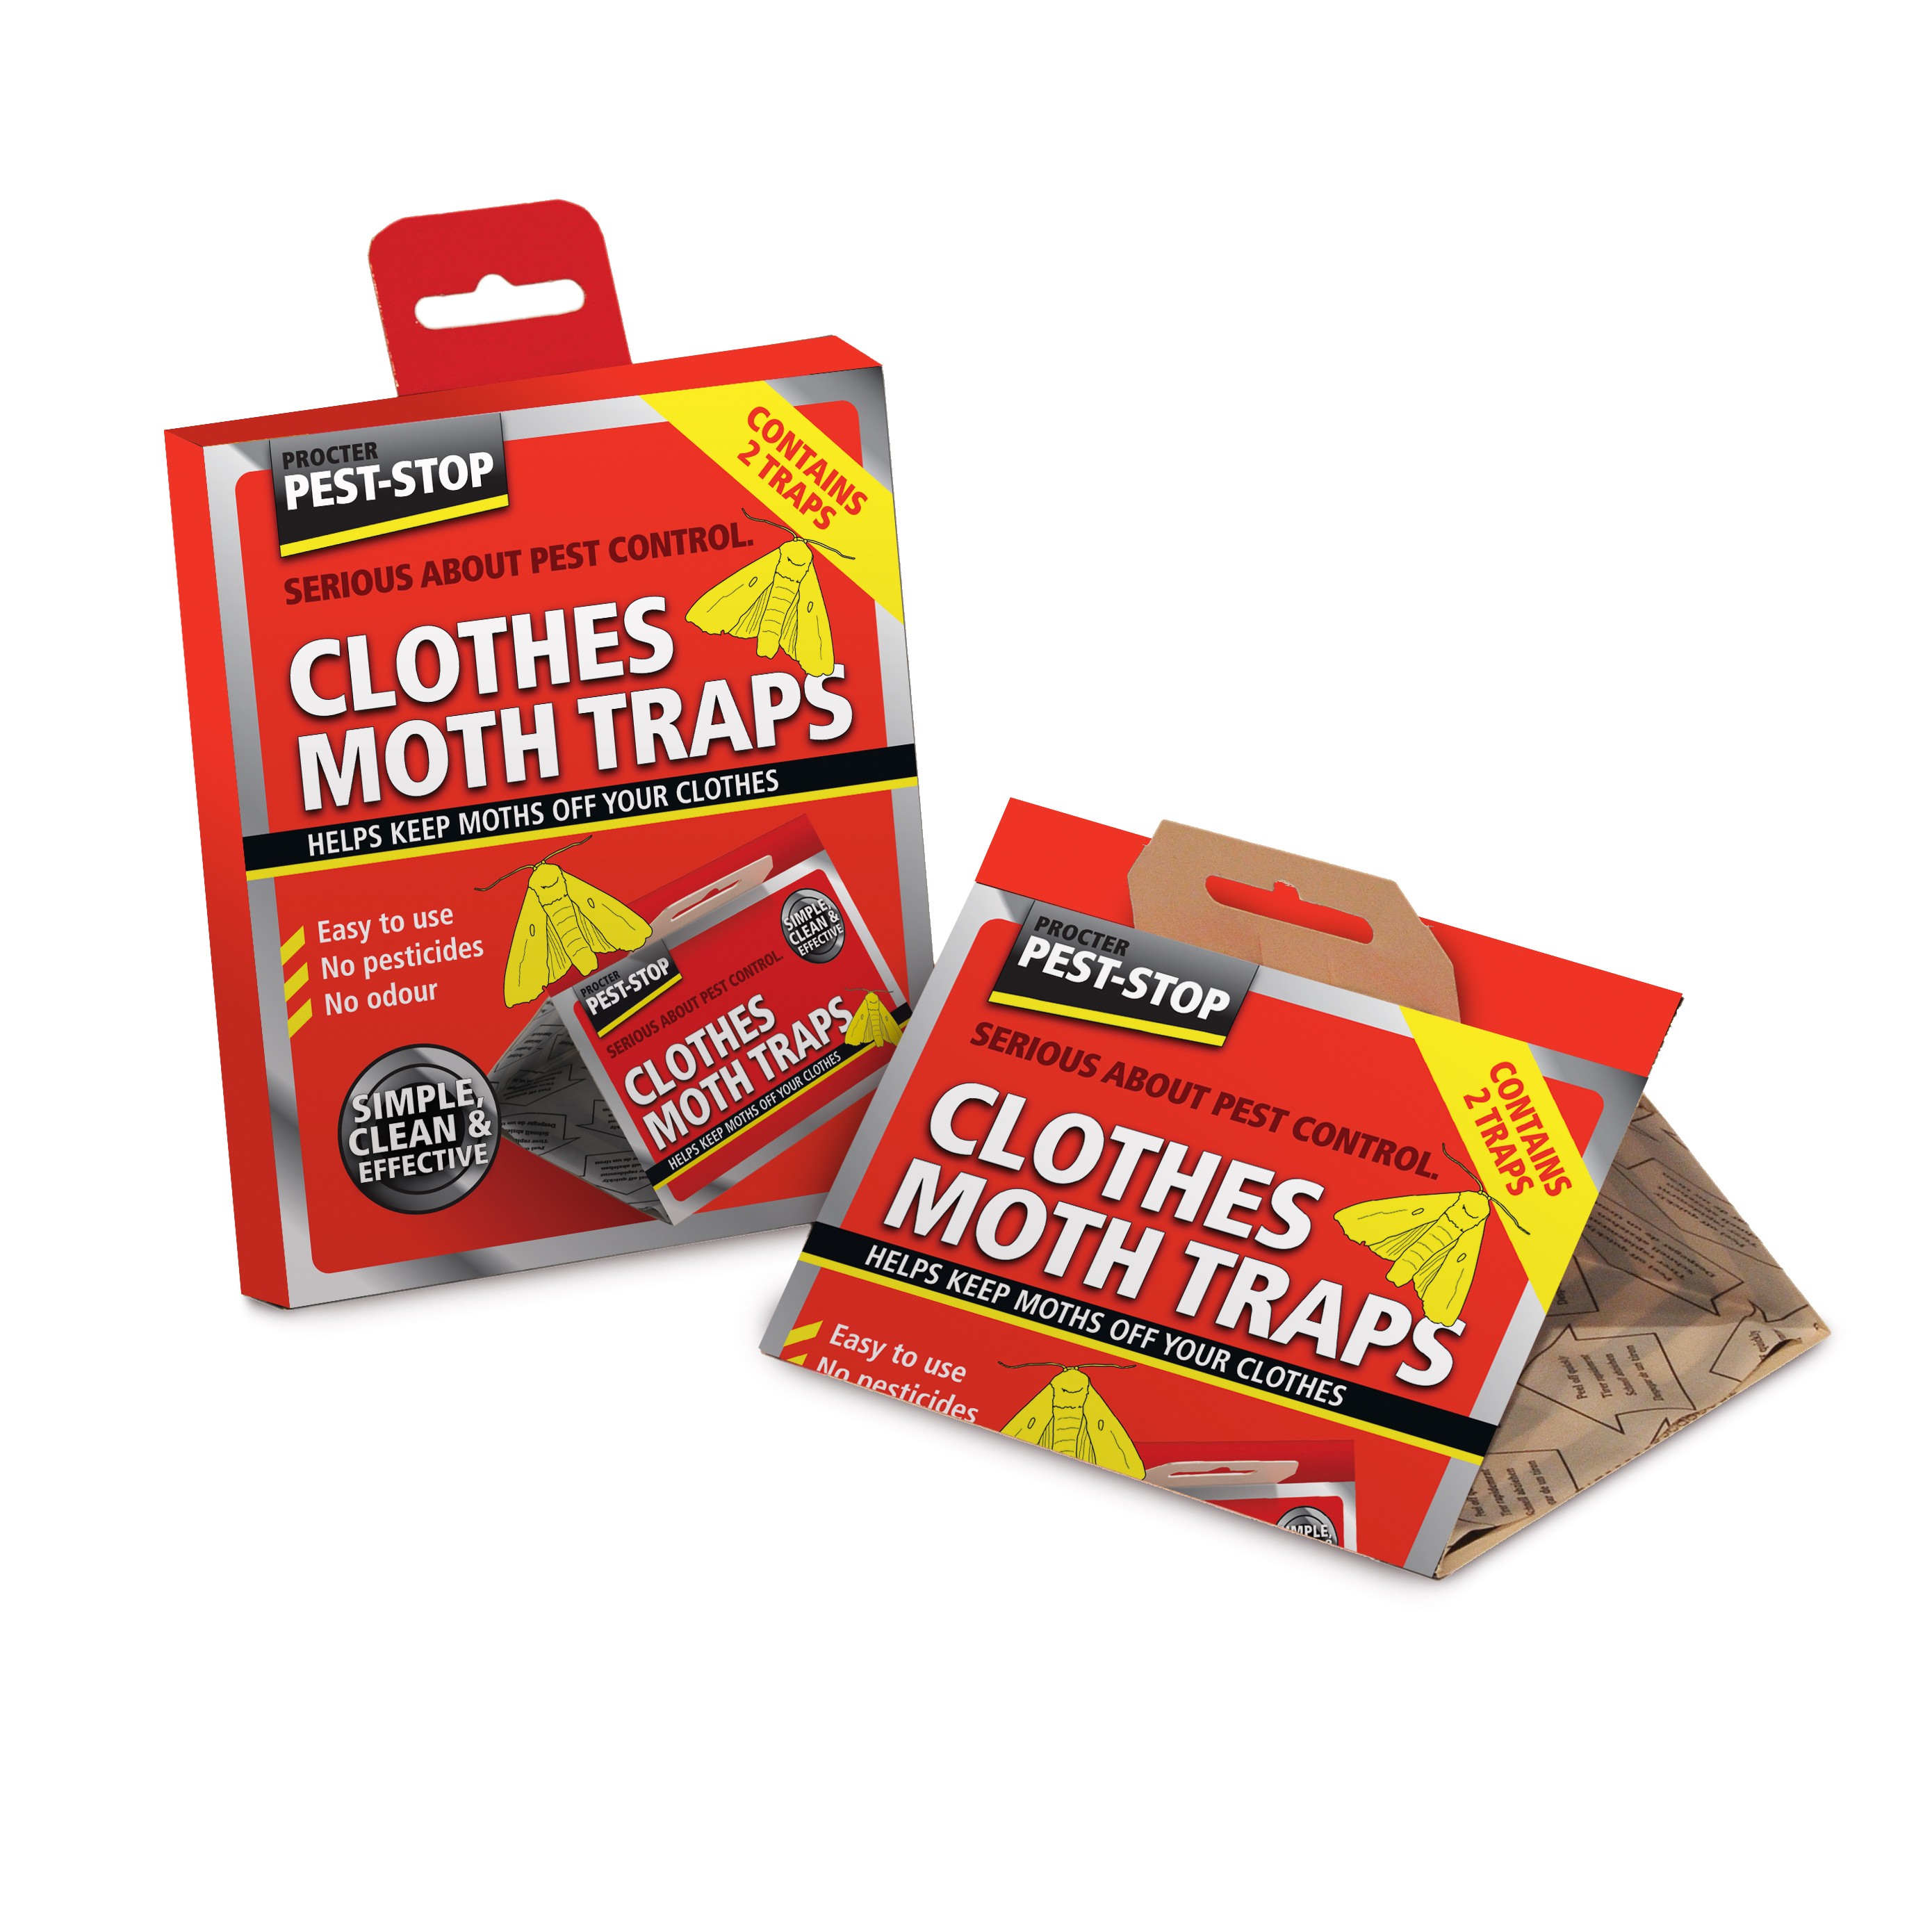 Pest Stop Clothes moth trap pack of 2